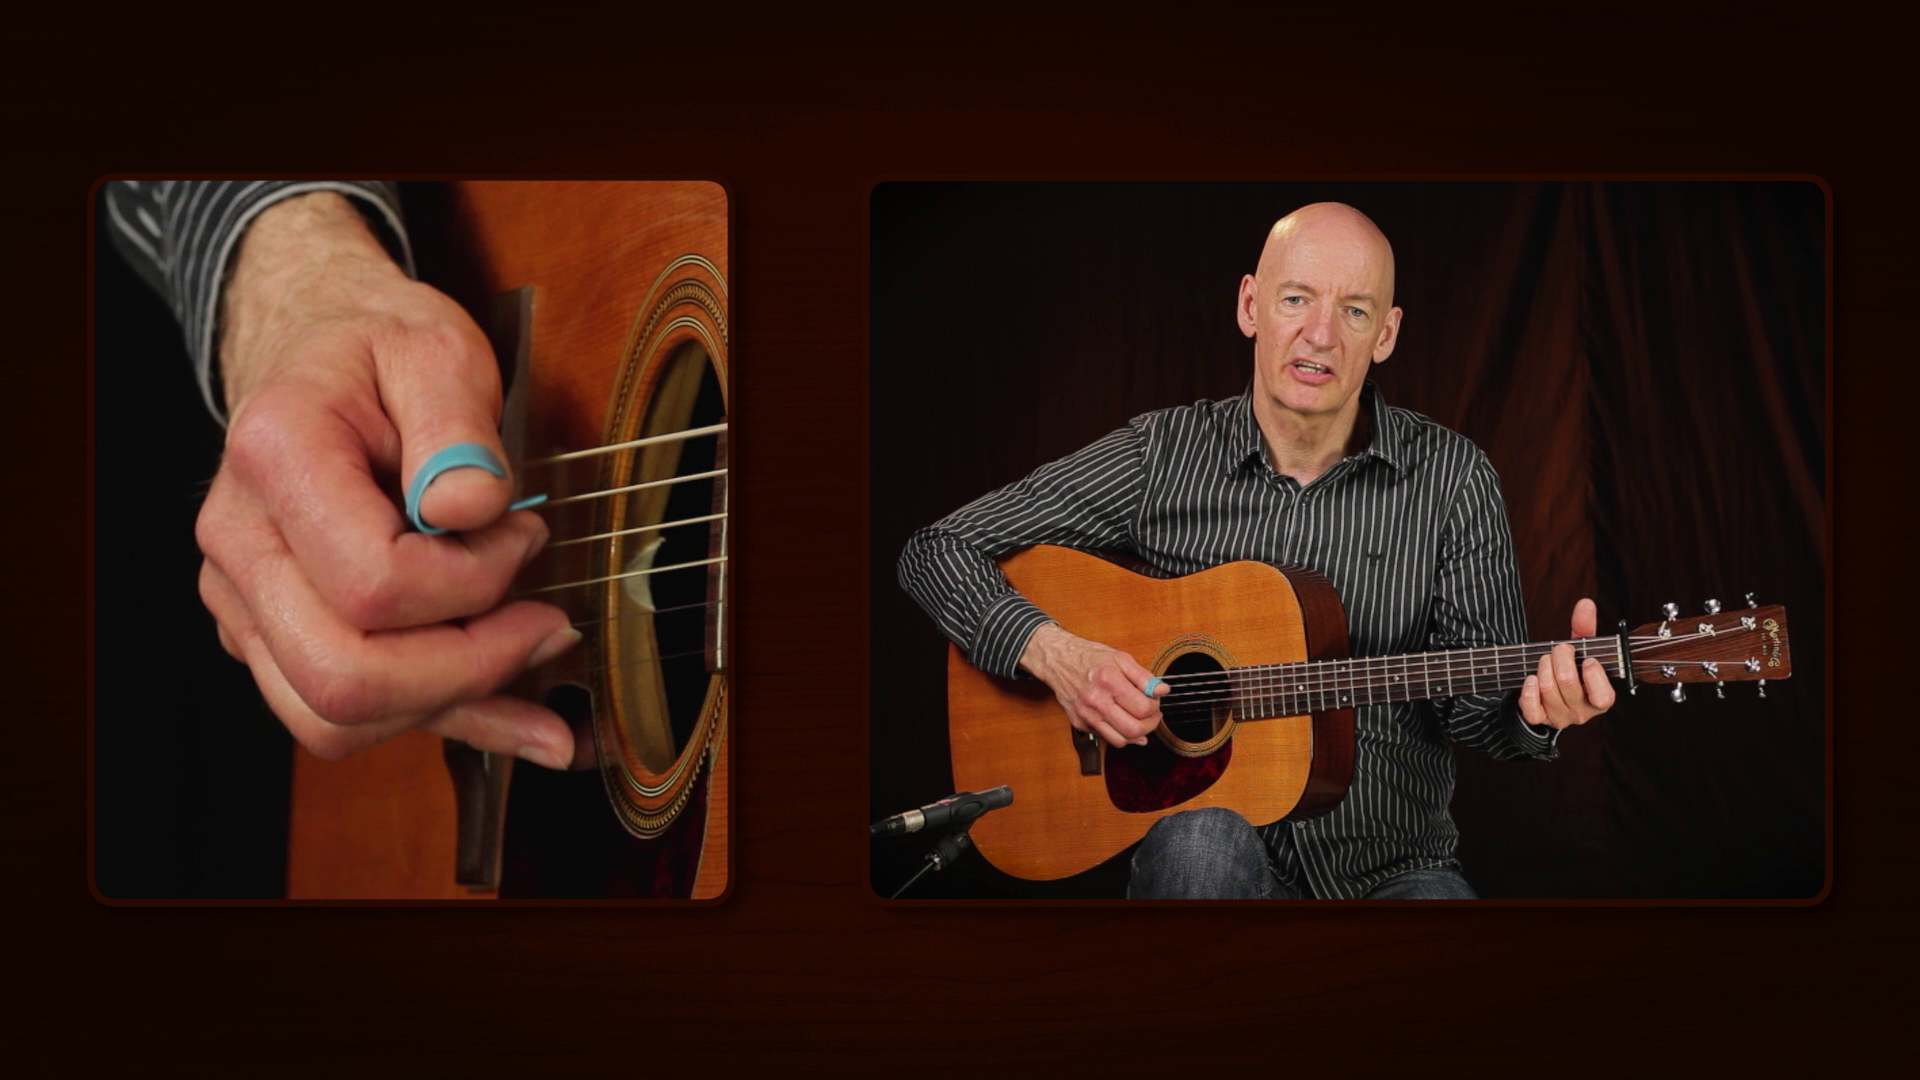 Taylor Carr Media, Training, Ray Bell FingerStyle Guitar Workshop Lesson 3, Portfolio Image, Multi-Camera In Studio Production